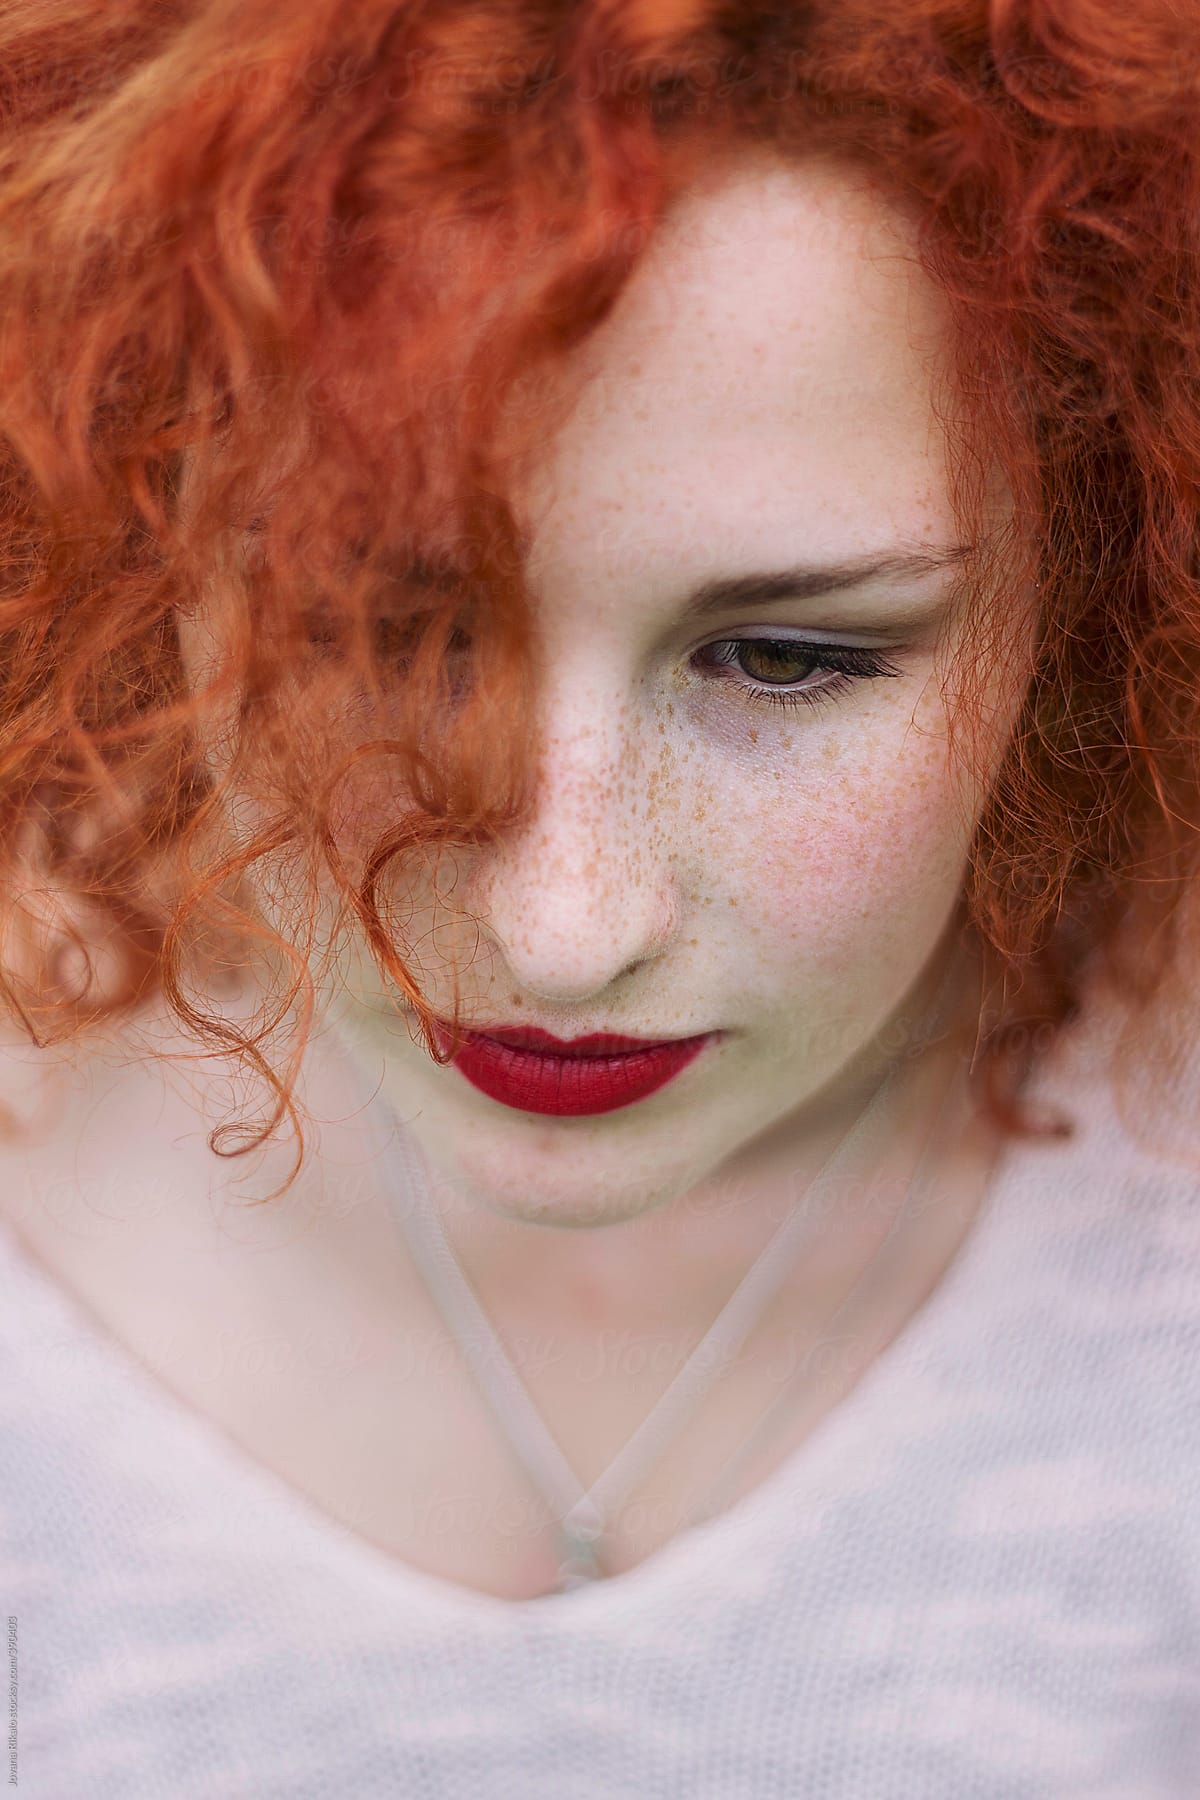 Ginger haired woman with freckles